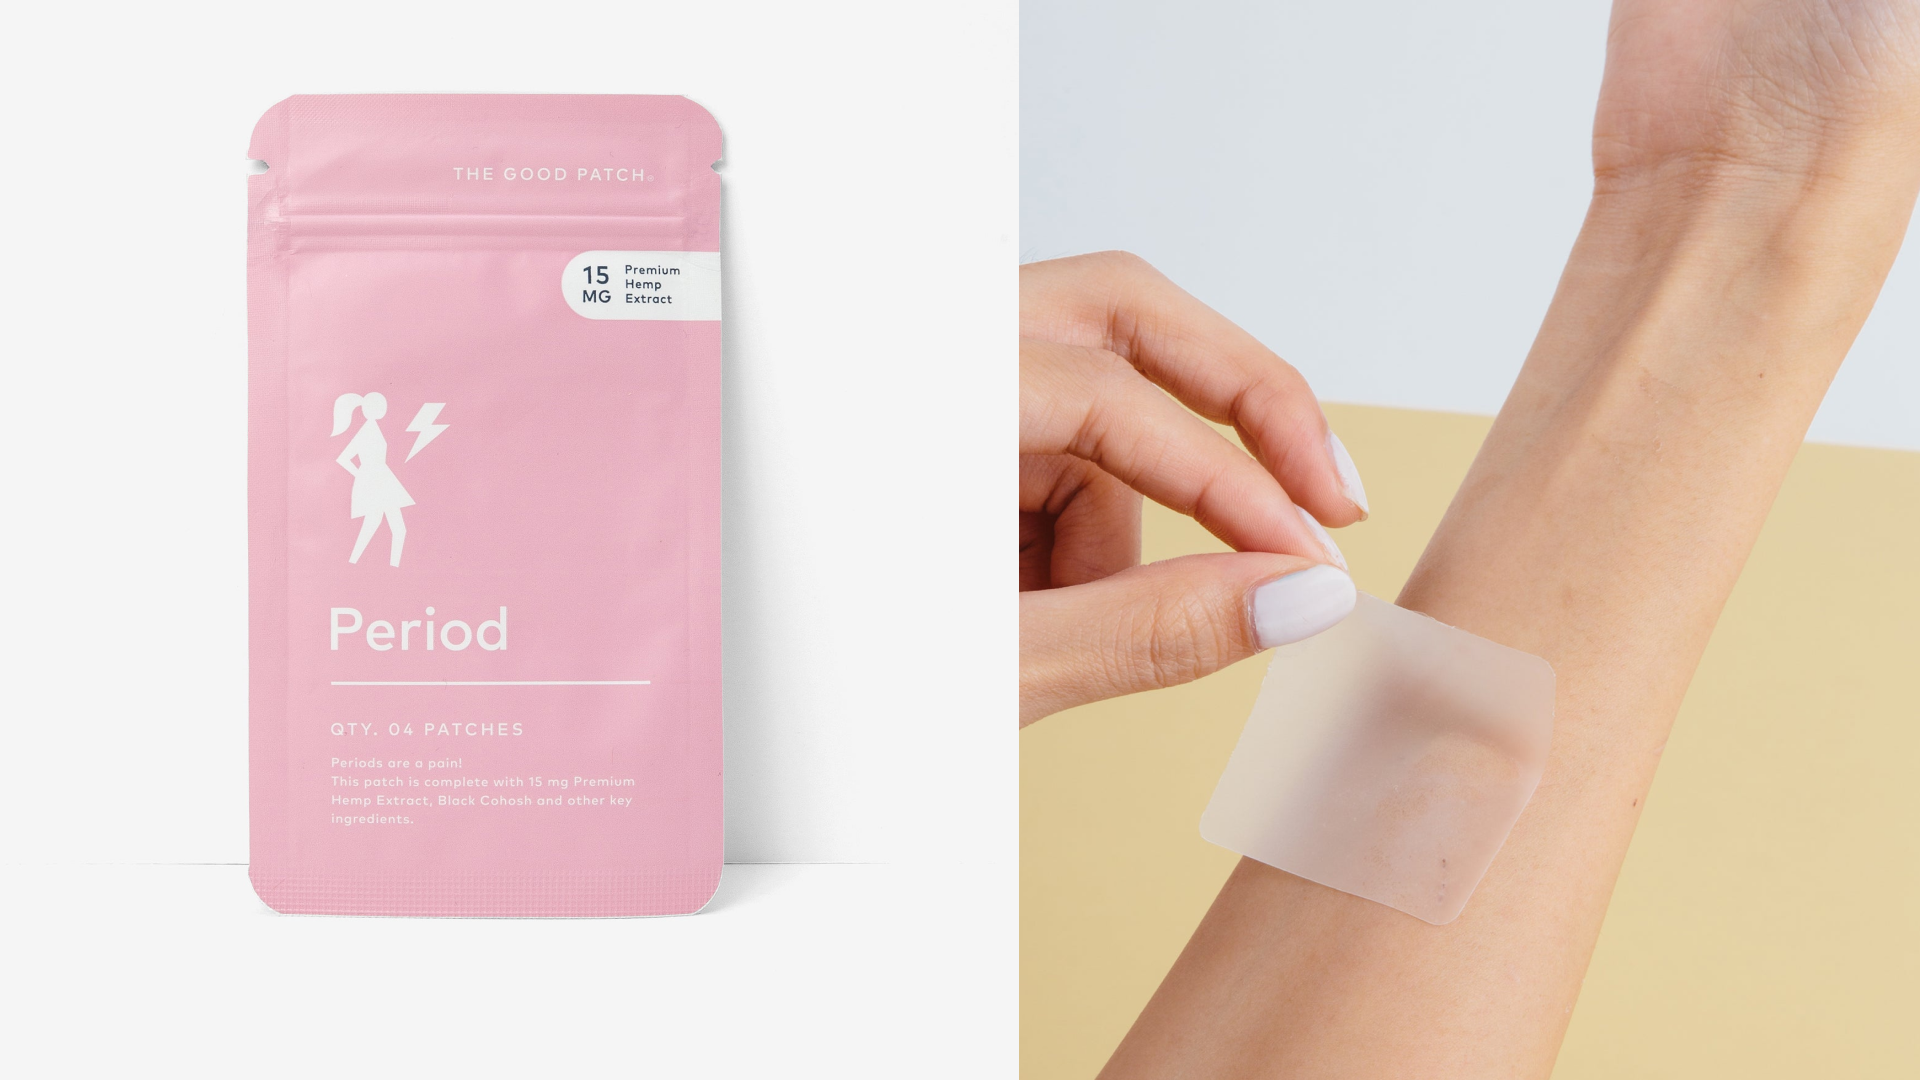 pain relief patch to help with period cramps